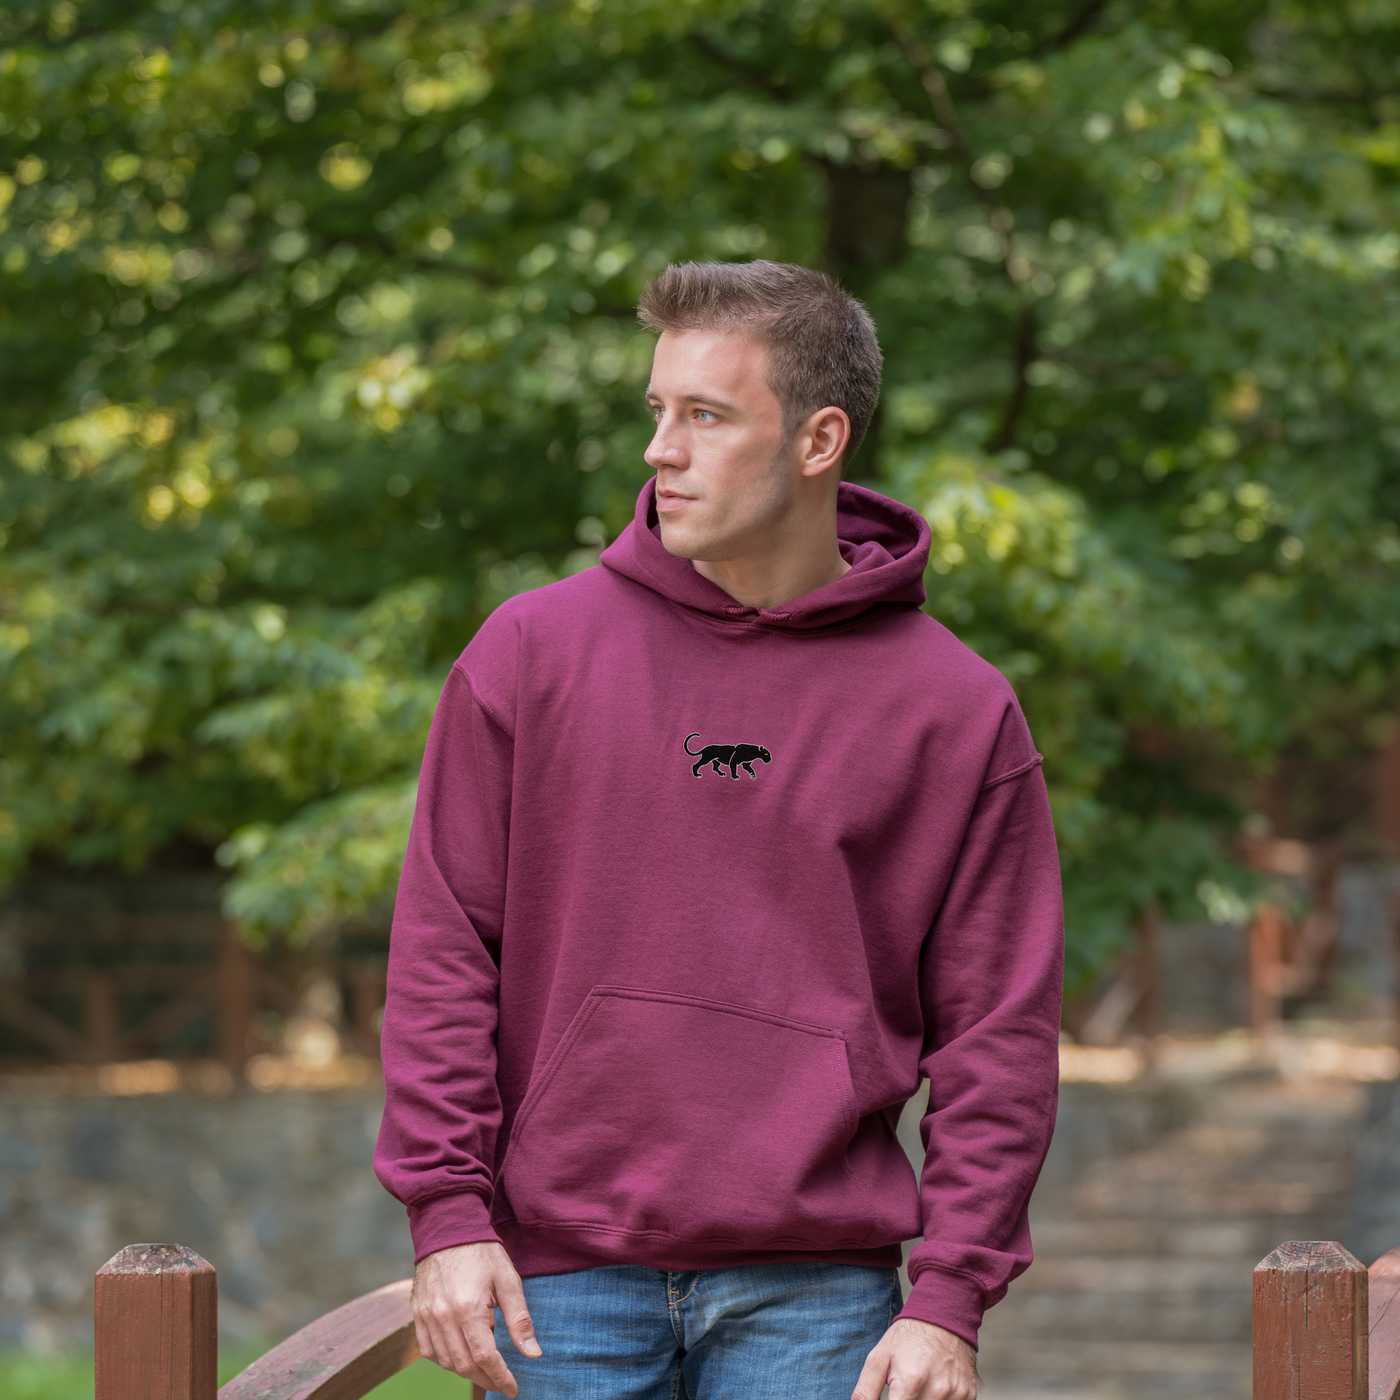 Bobby's Planet Men's Embroidered Black Jaguar Hoodie from South American Amazon Animals Collection in Maroon Color#color_maroon